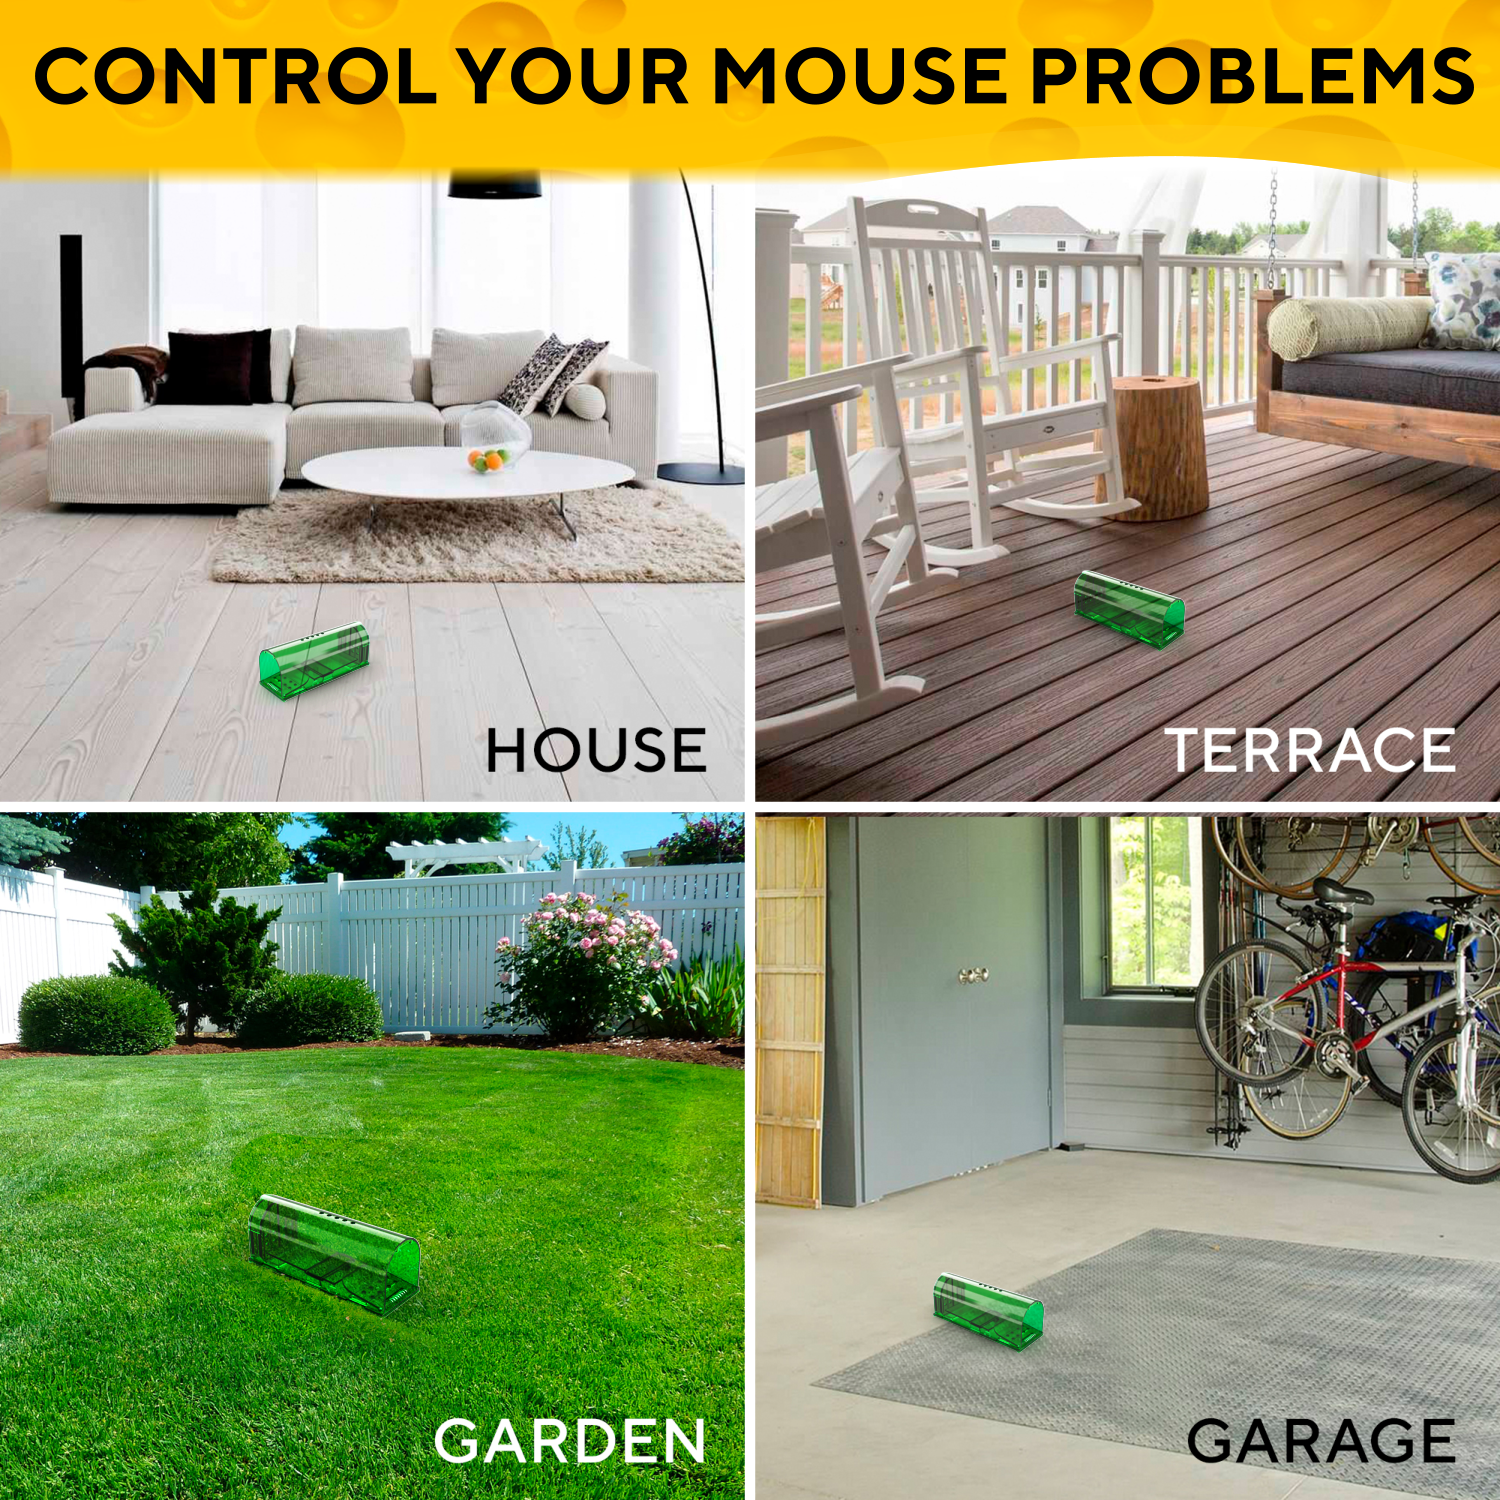 Problems with Using Mouse Traps in Your Home, Farm, or Business - Earthkind